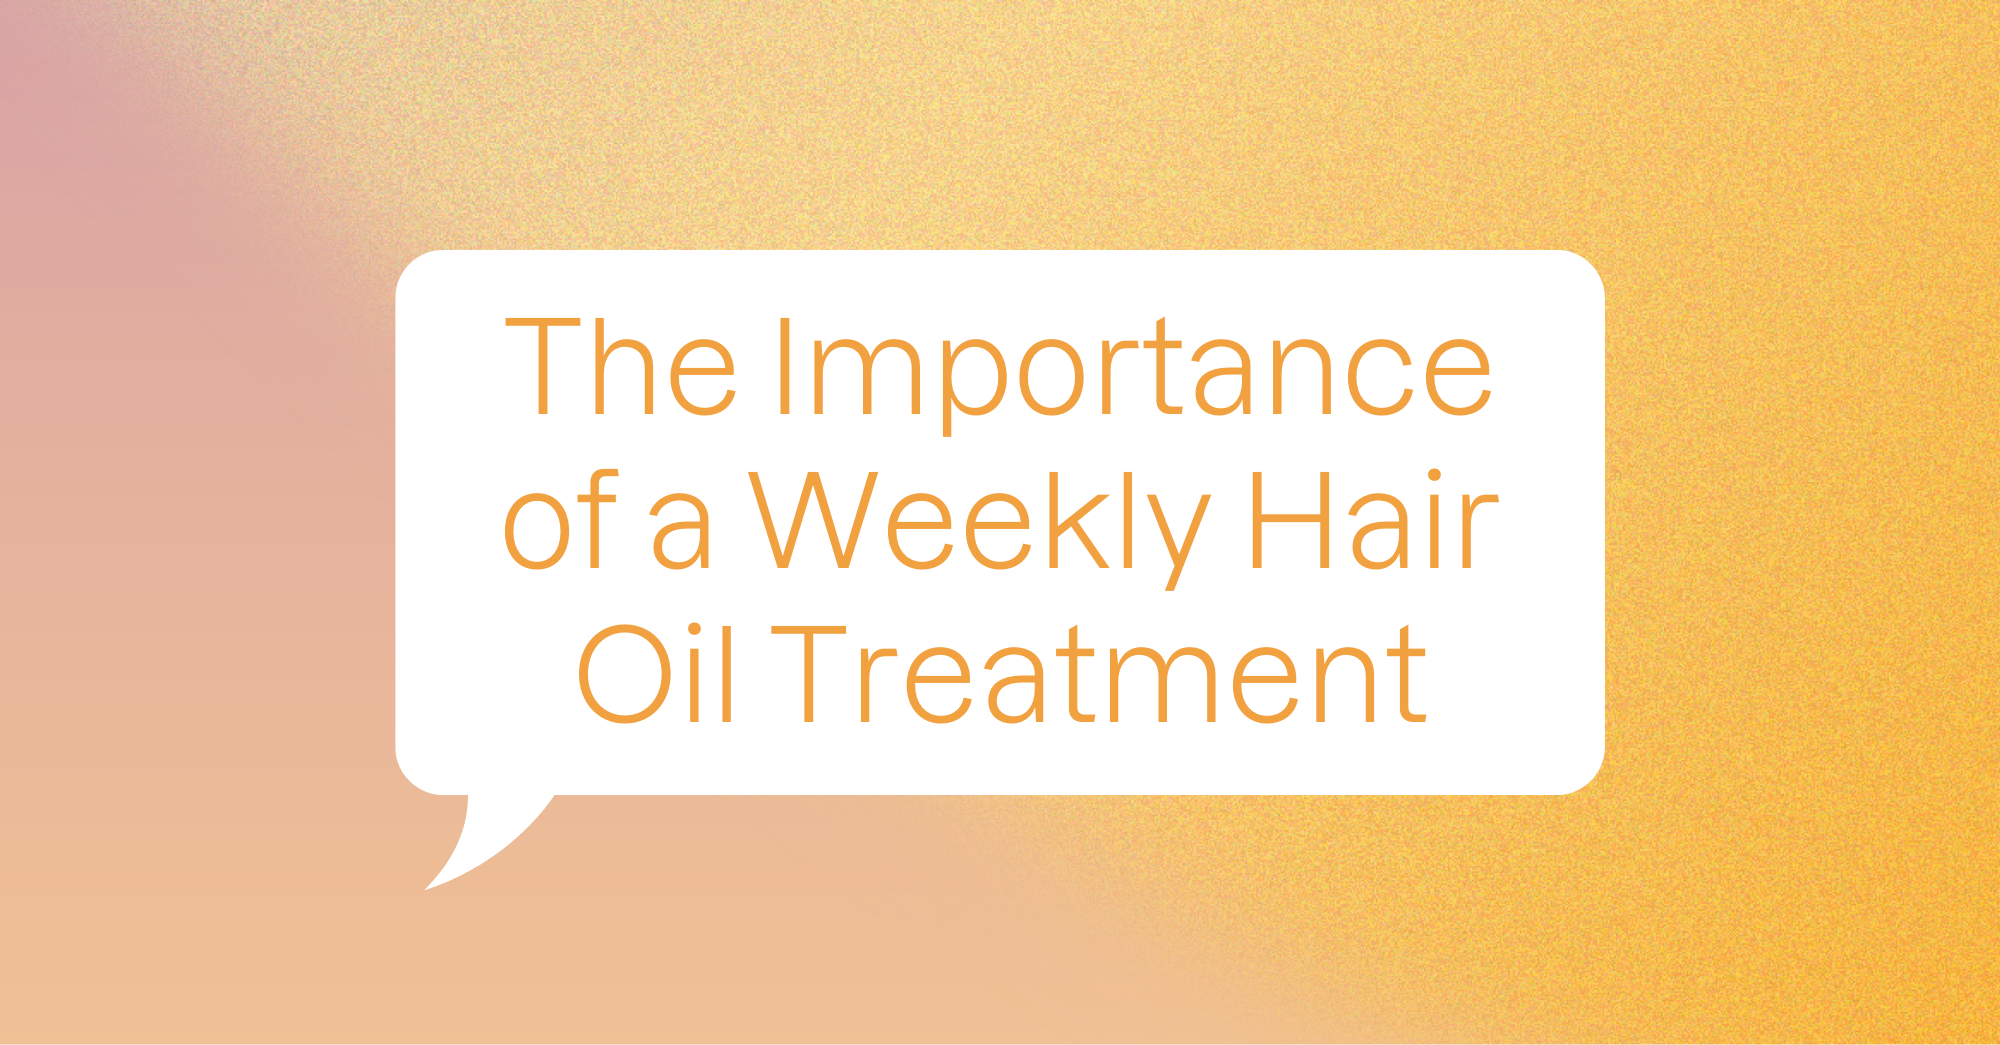 The Importance of a Weekly Hair Oil Treatment